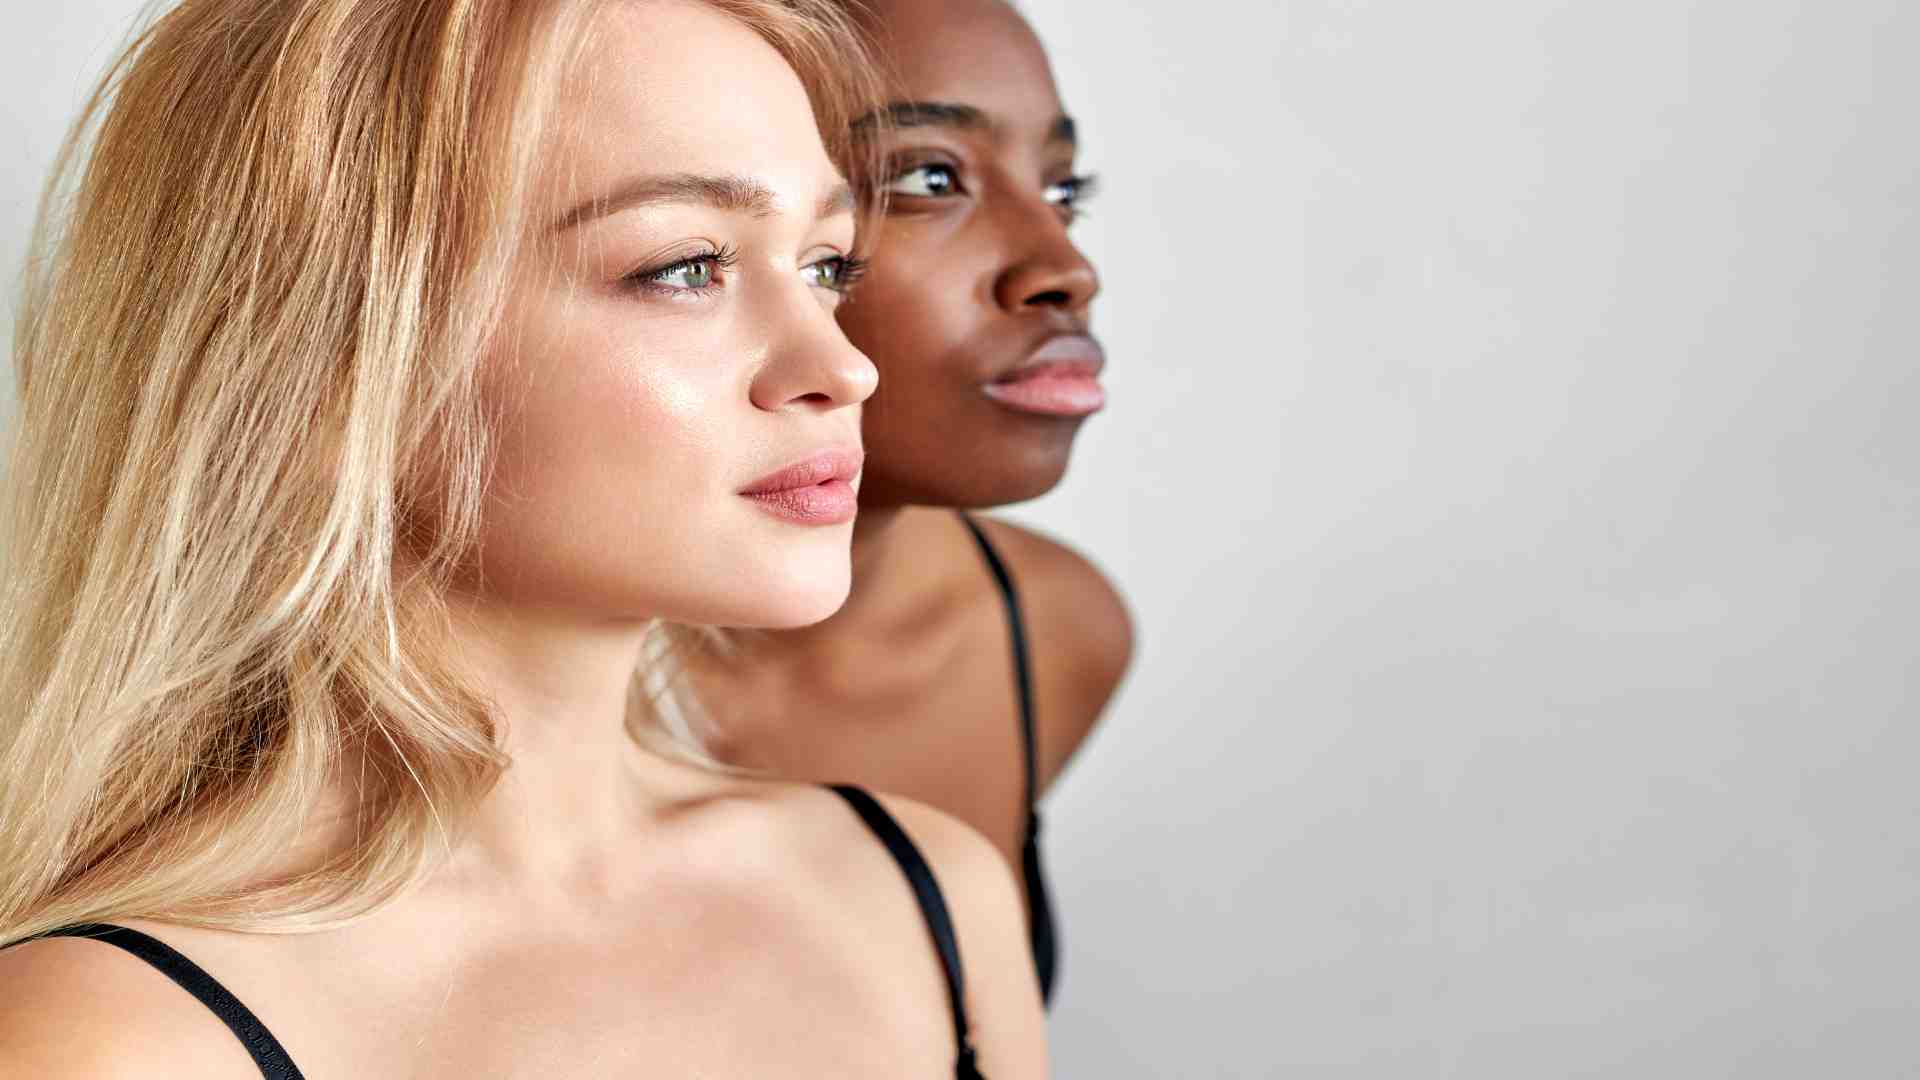 All Things You Need to Know About Ethnic Rhinoplasty